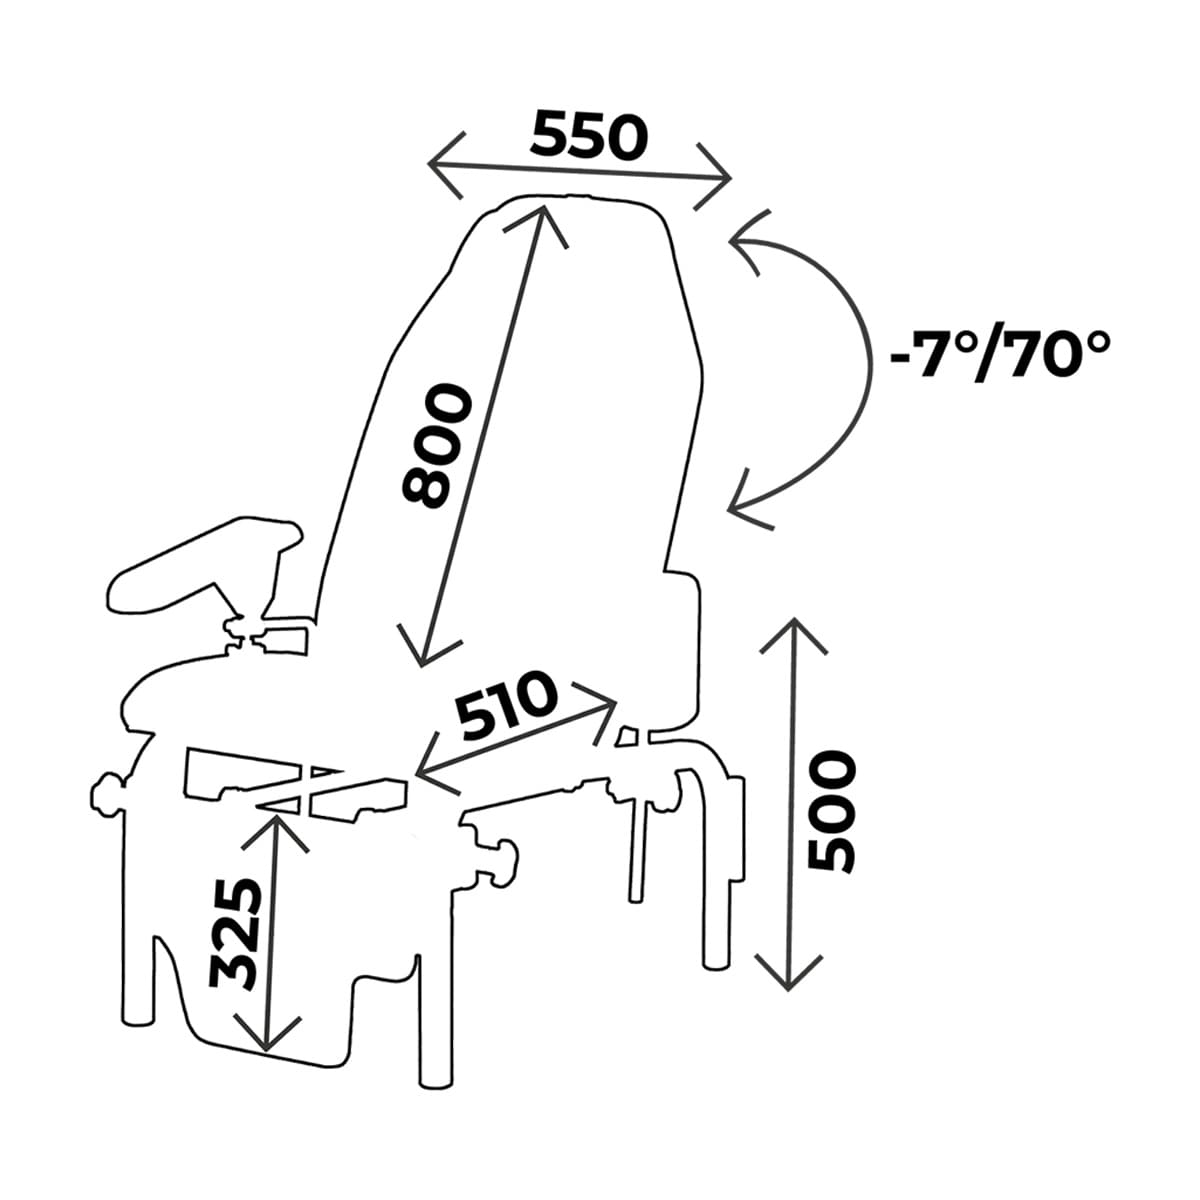 Blood chair height 50cm, 3 sections, non-rotative, with blood test splints